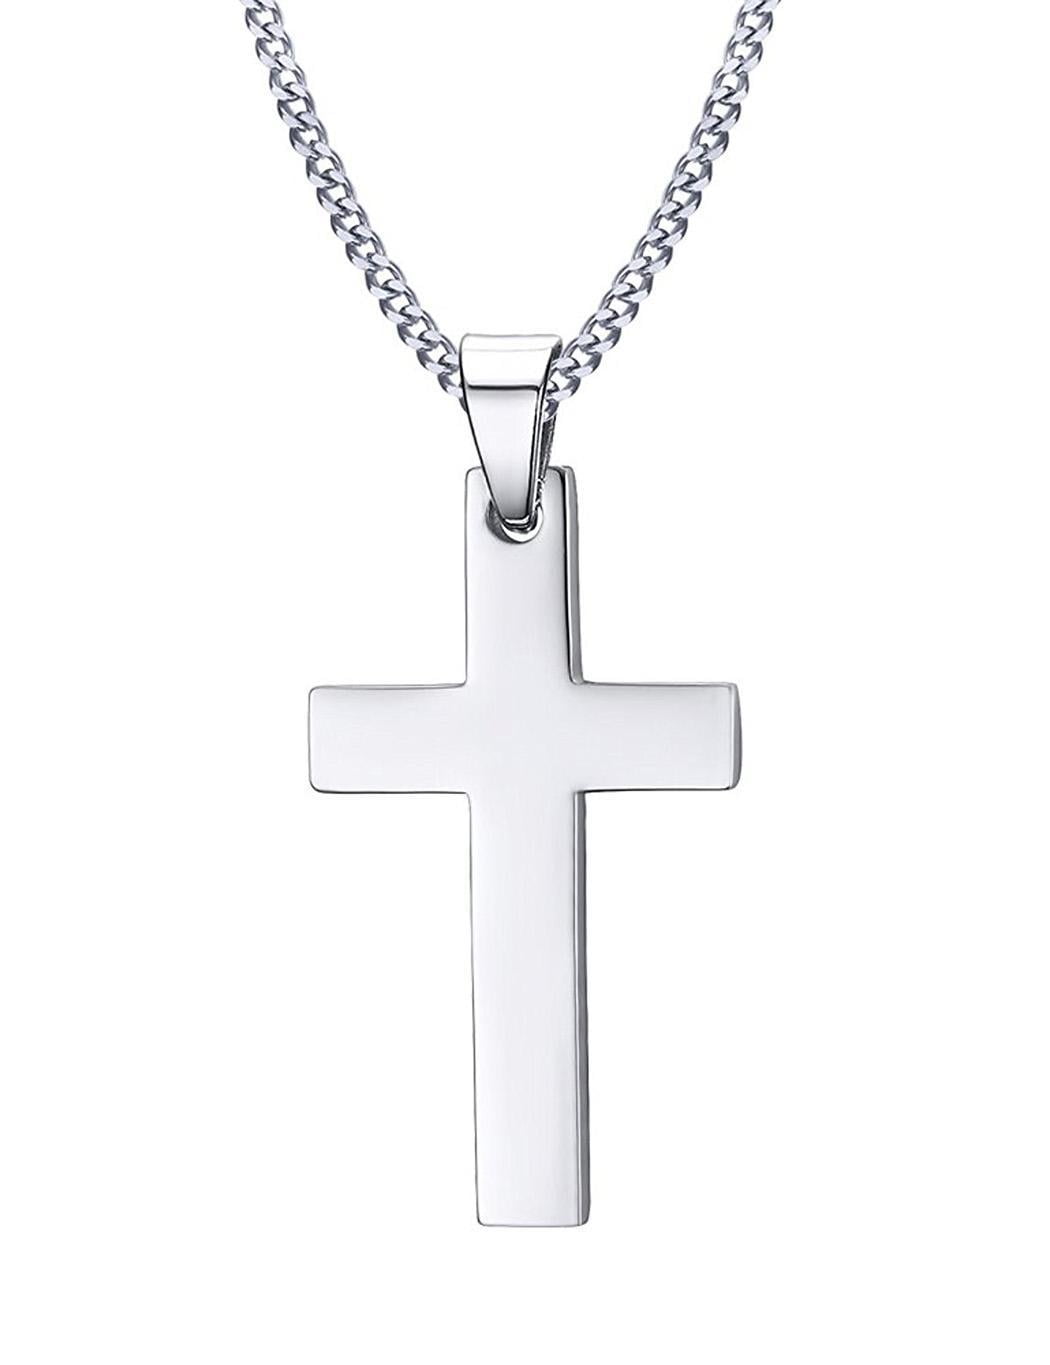 Black Silver Stainless Steel Cross Pendant Unisex's Mens Necklace Chain